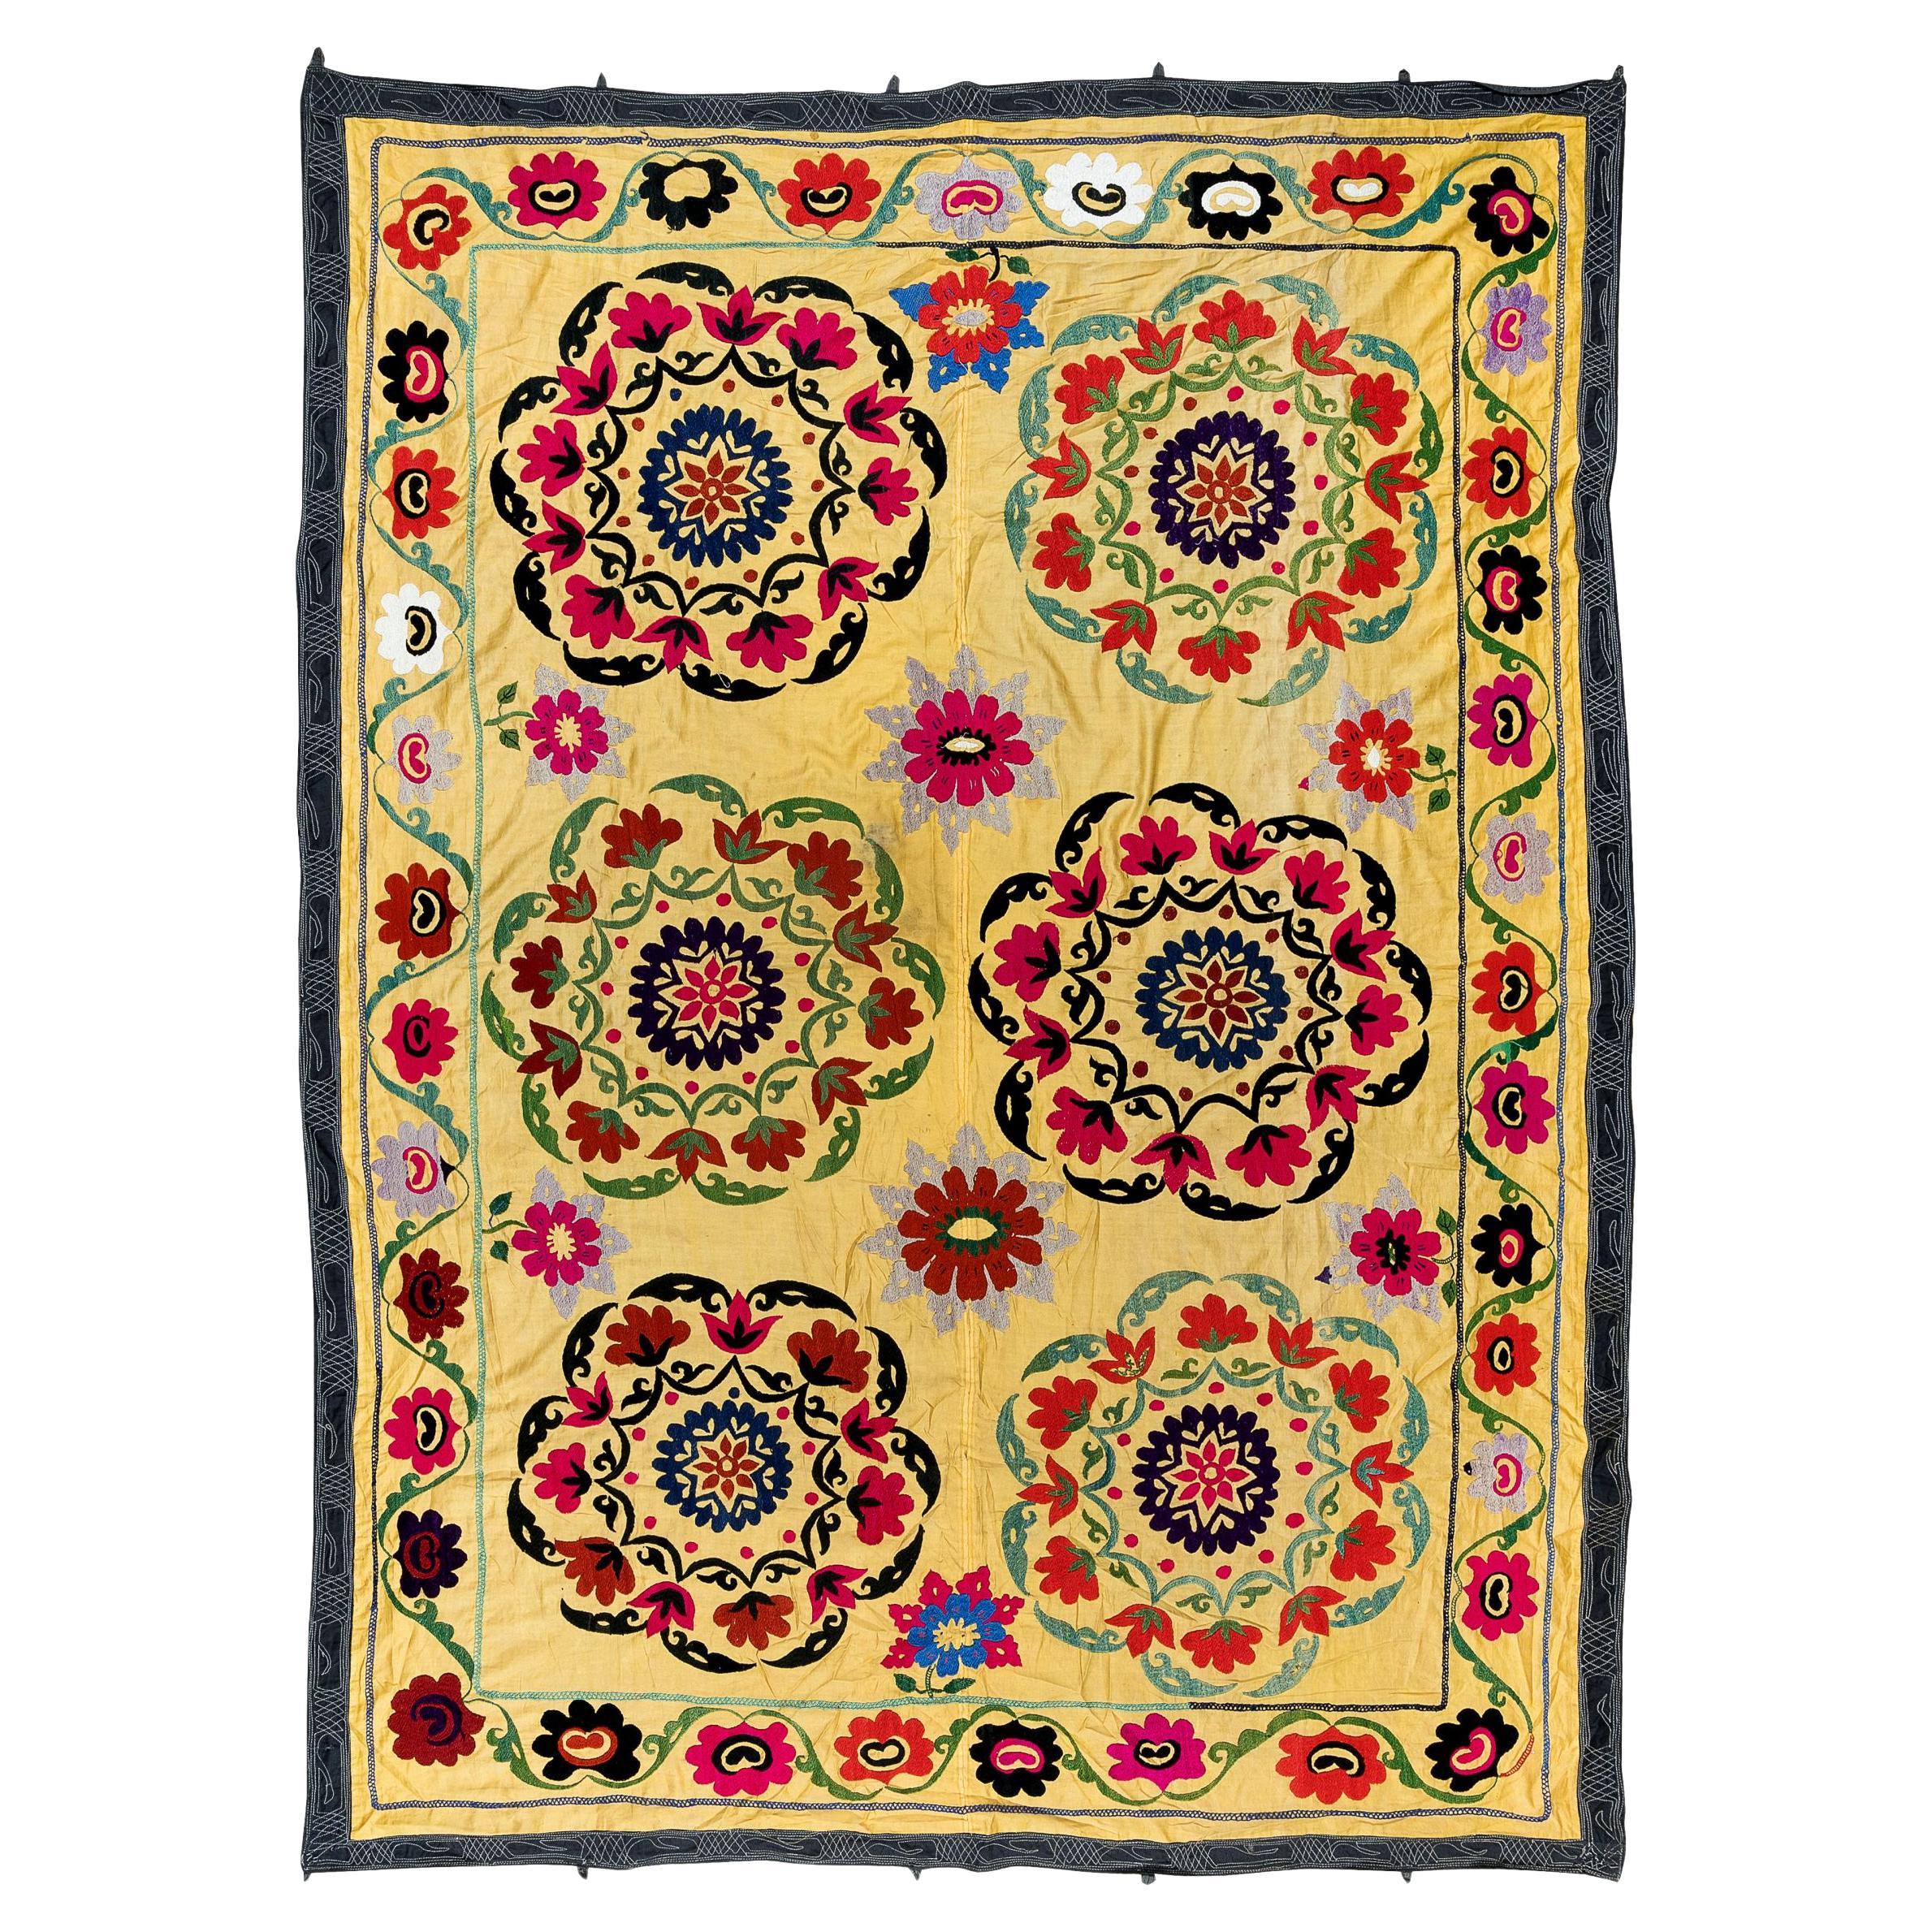 5x7.3 Ft Silk Embroidery Bed Cover, Uzbek Suzani Wall Hanging in Yellow For Sale